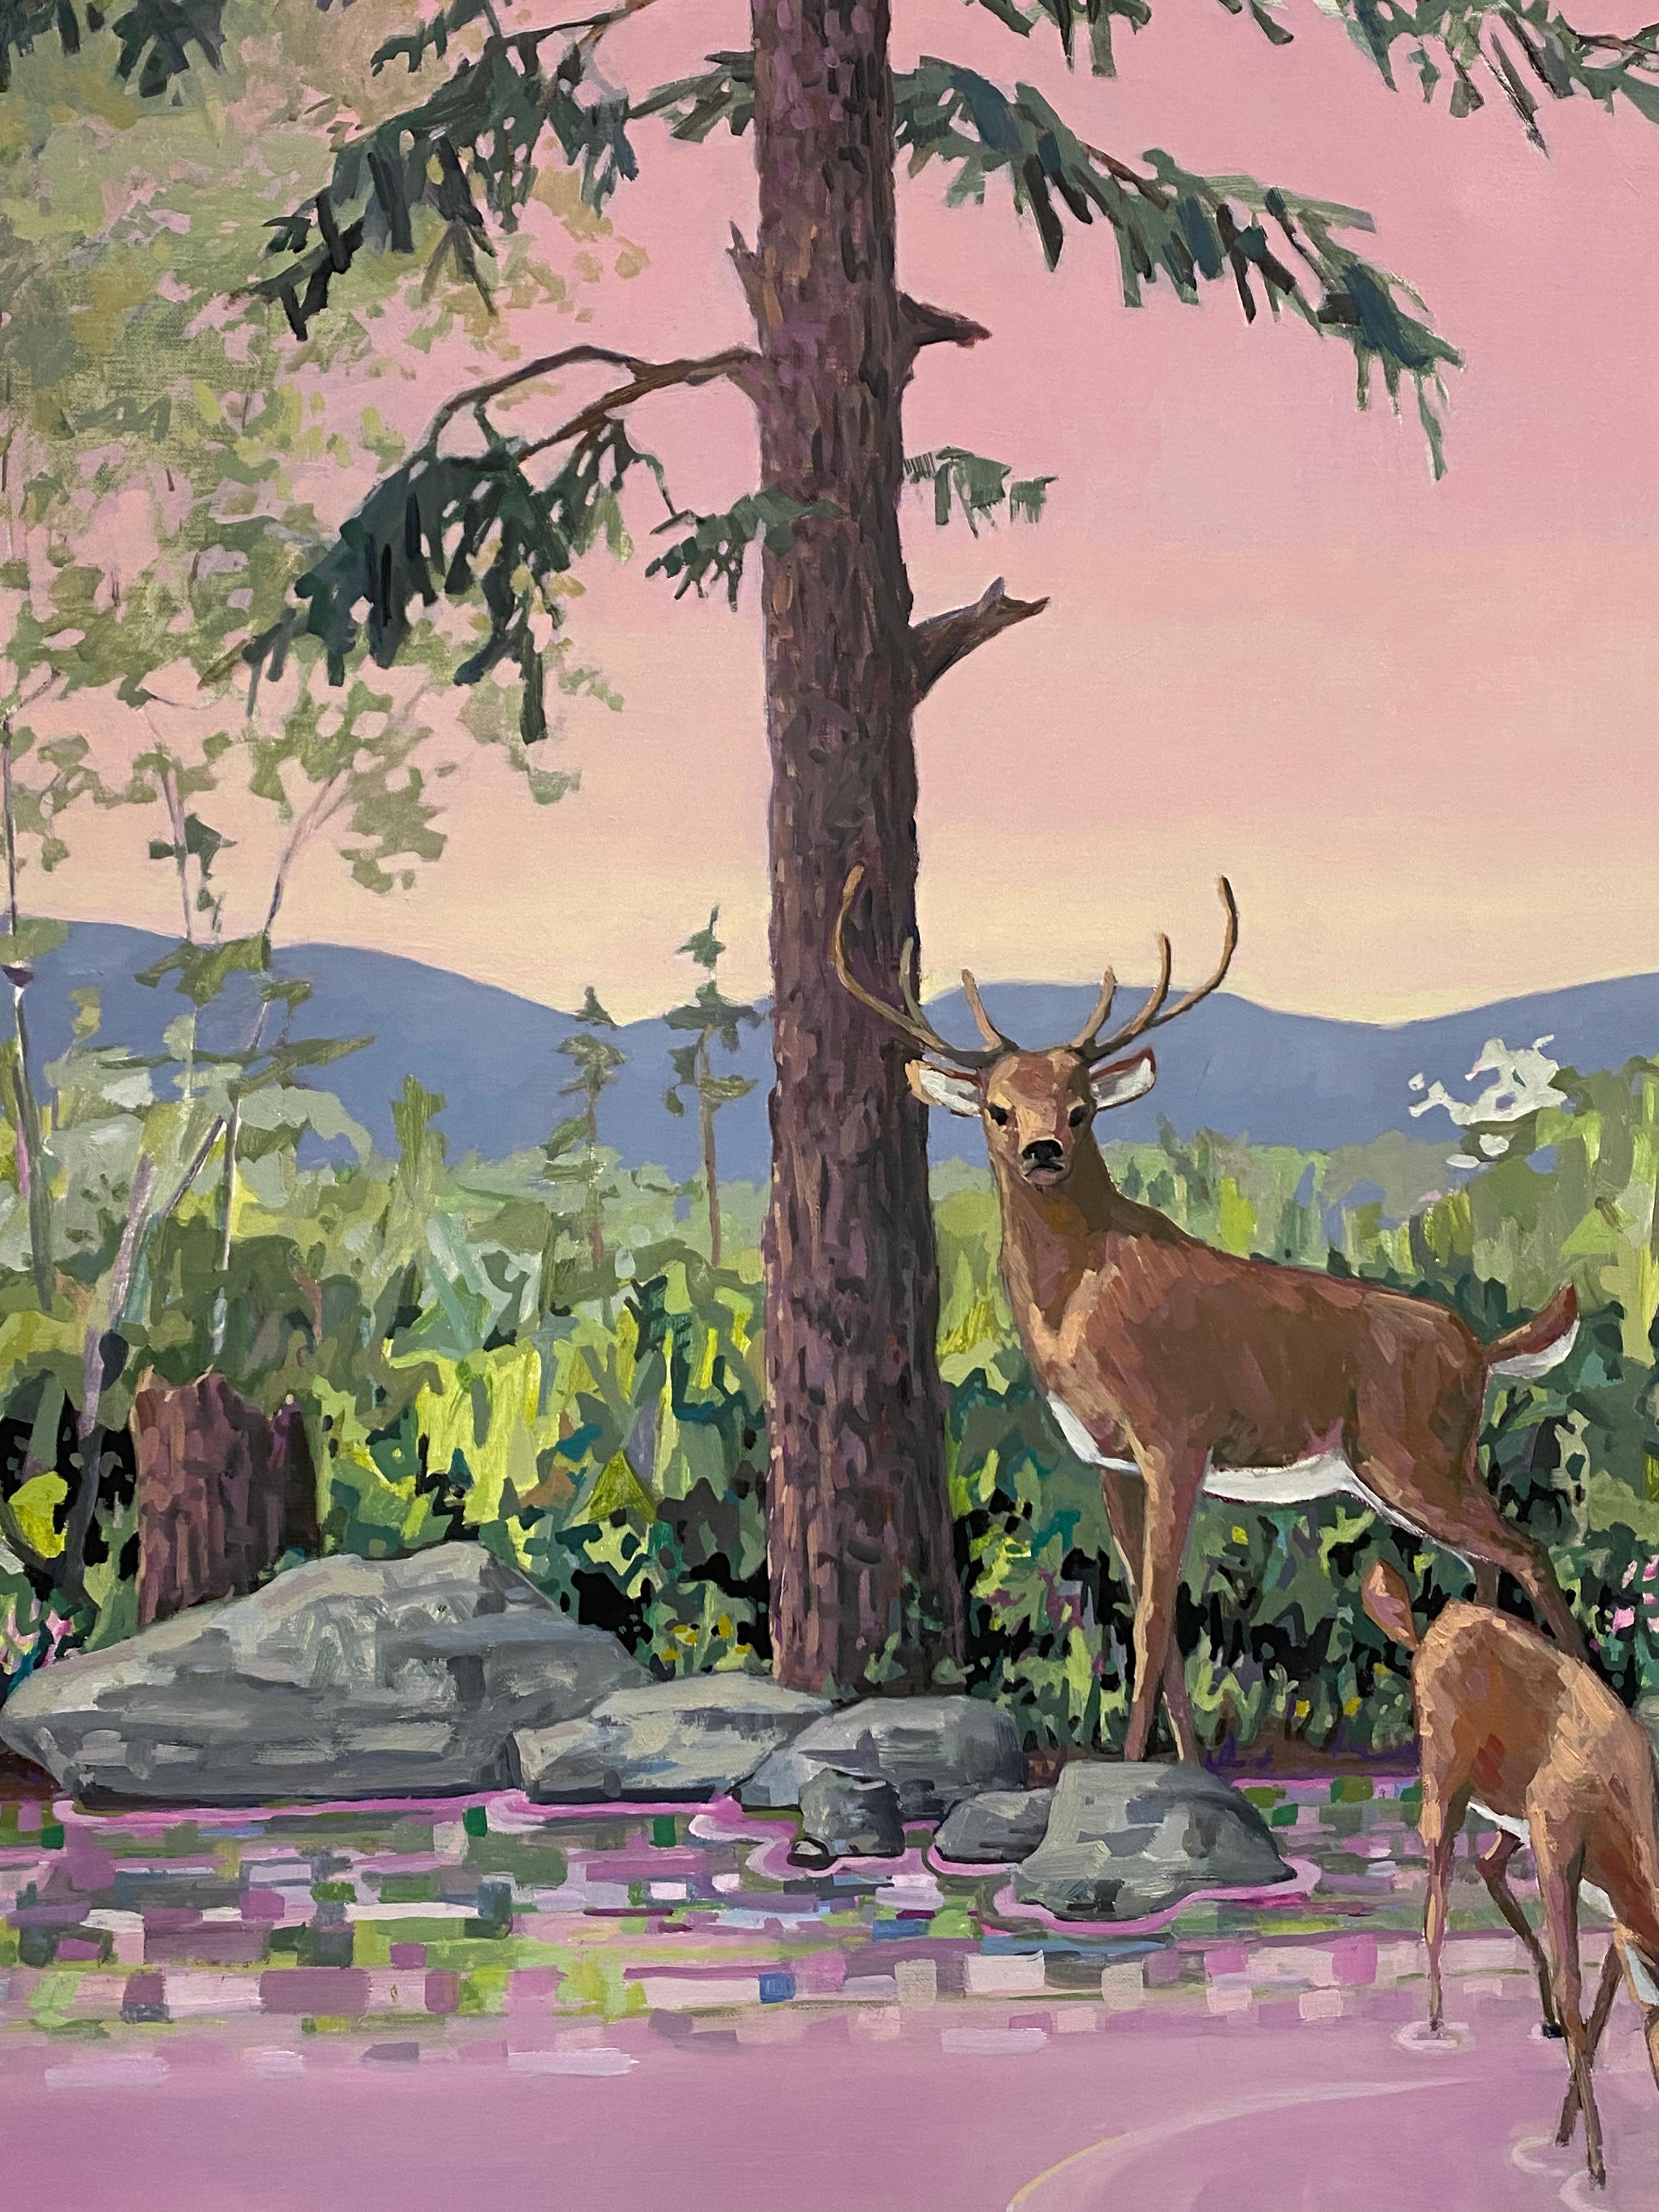 Two deer, a doe and a stag with antlers stand knee-deep in water pink at the surface and gray blue in the depths. Dark green pine trees line the water's edge in the background, while the doe's hoof creates ripples on the water's surface in this